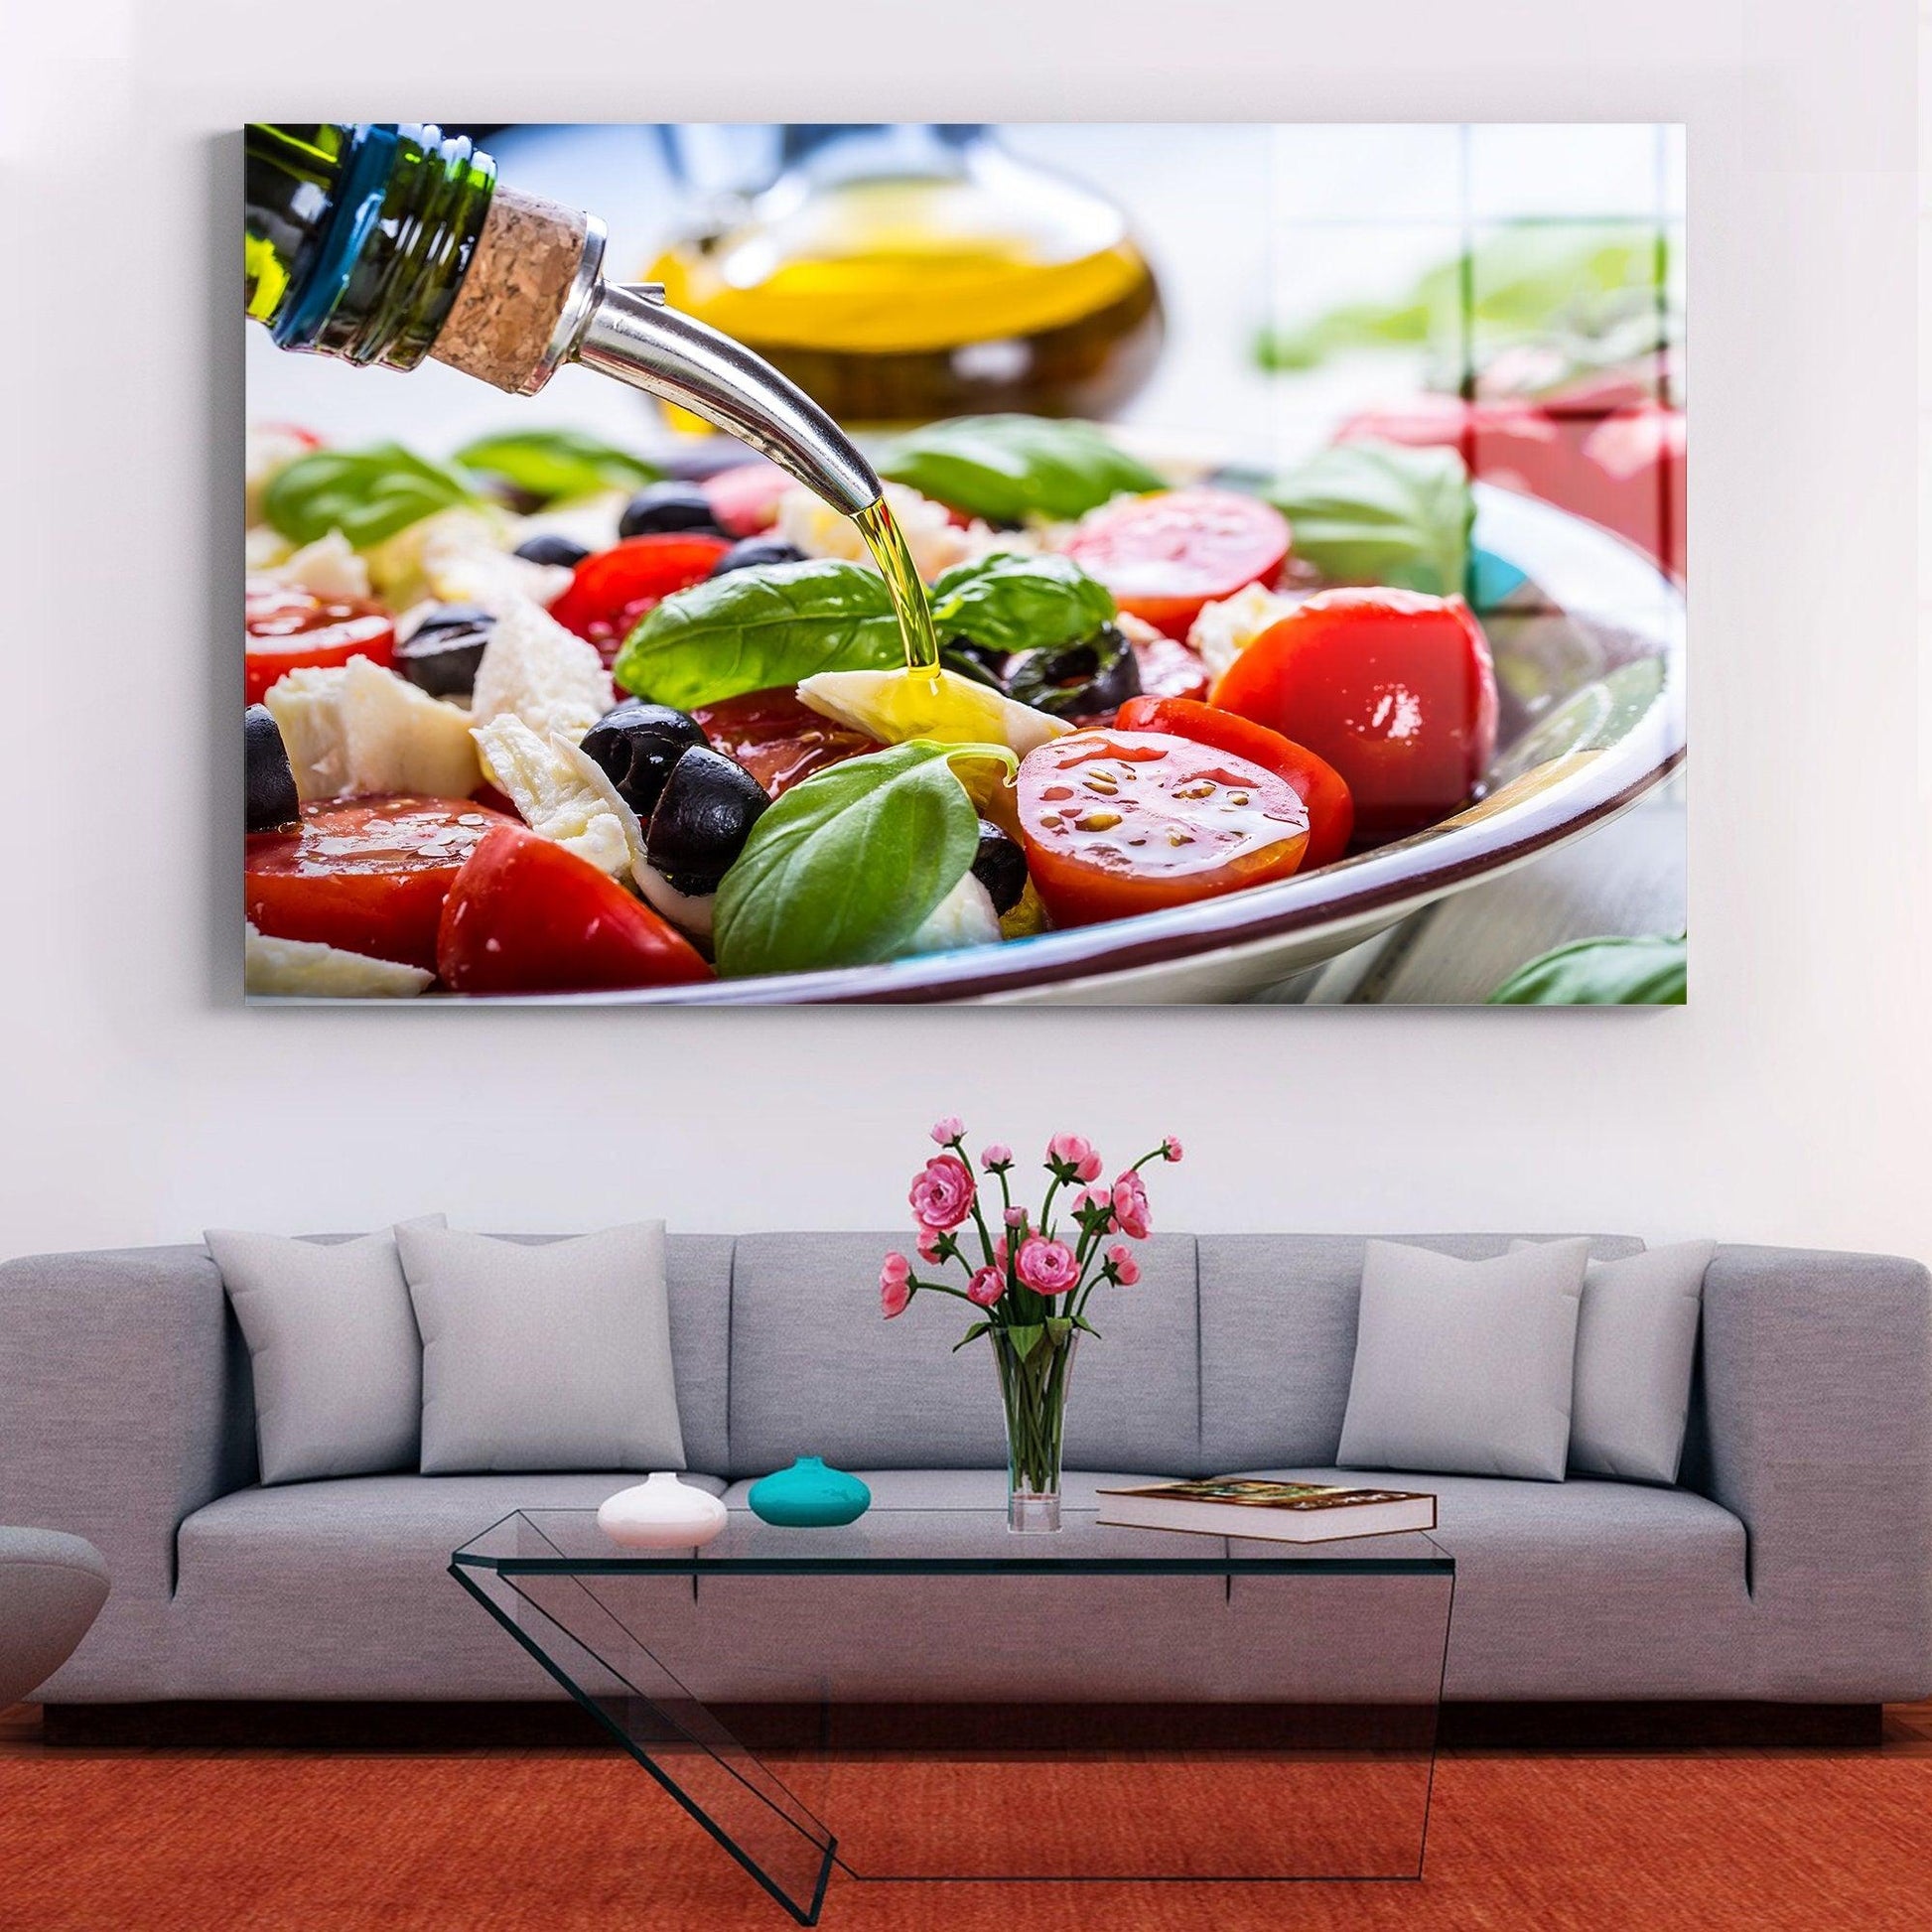 Salad Tempered Glass Large Wall Art Decor| salad art, Wall Hangings, Colorful Paintings and Prints for Living Room, wall decor kitchen